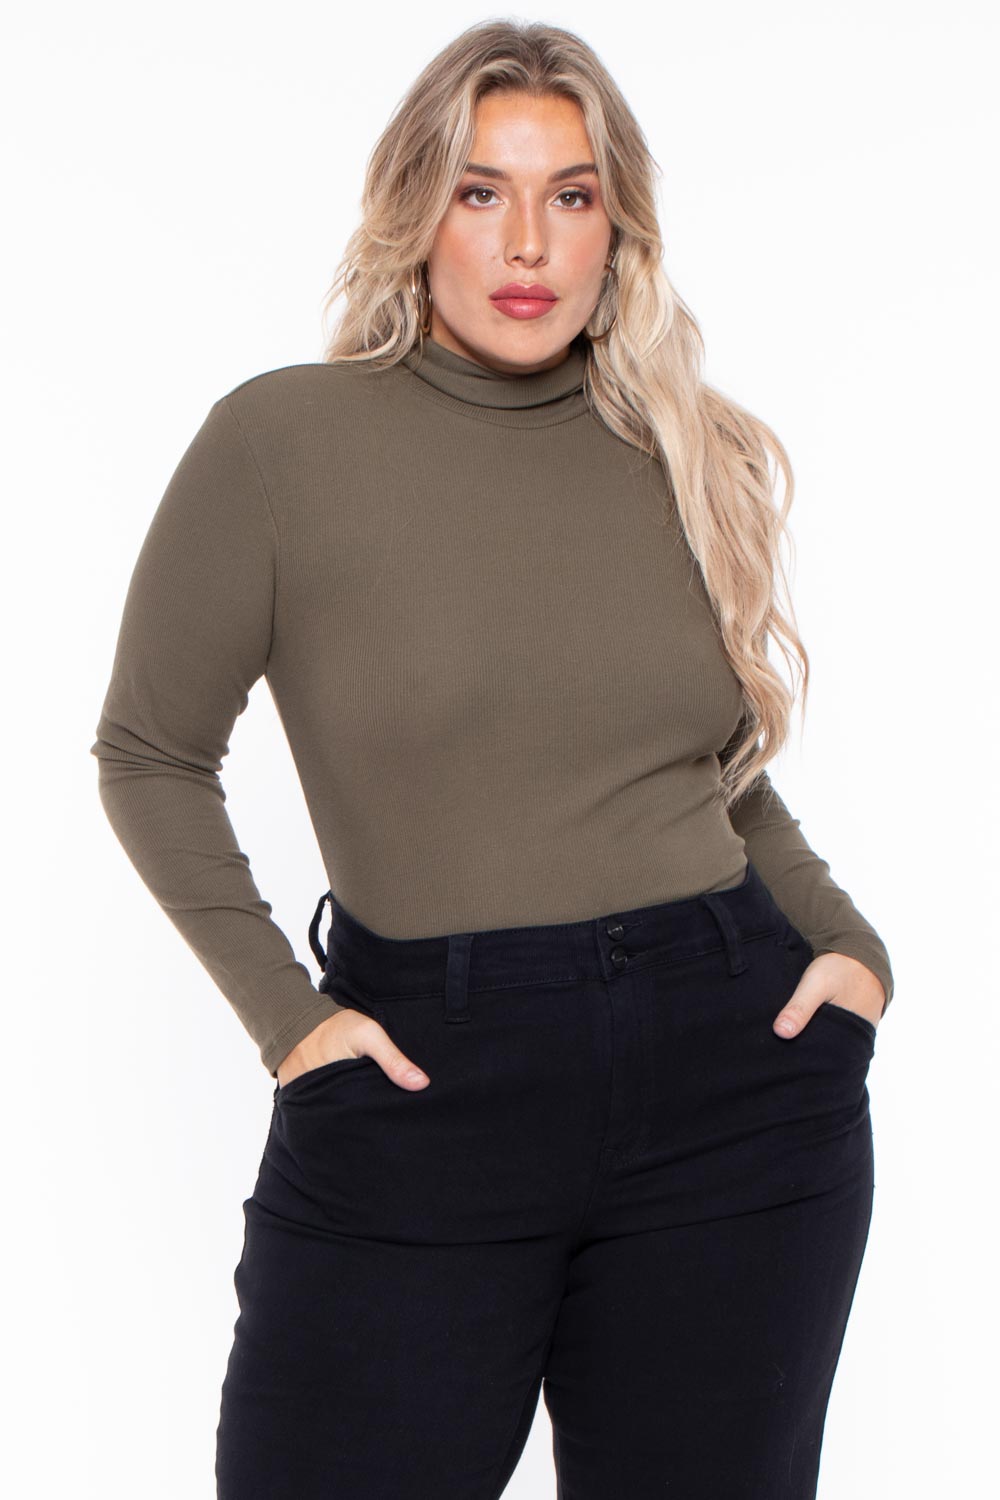 Ambiance Tops Plus Size Ribbed Turtleneck Top - Olive